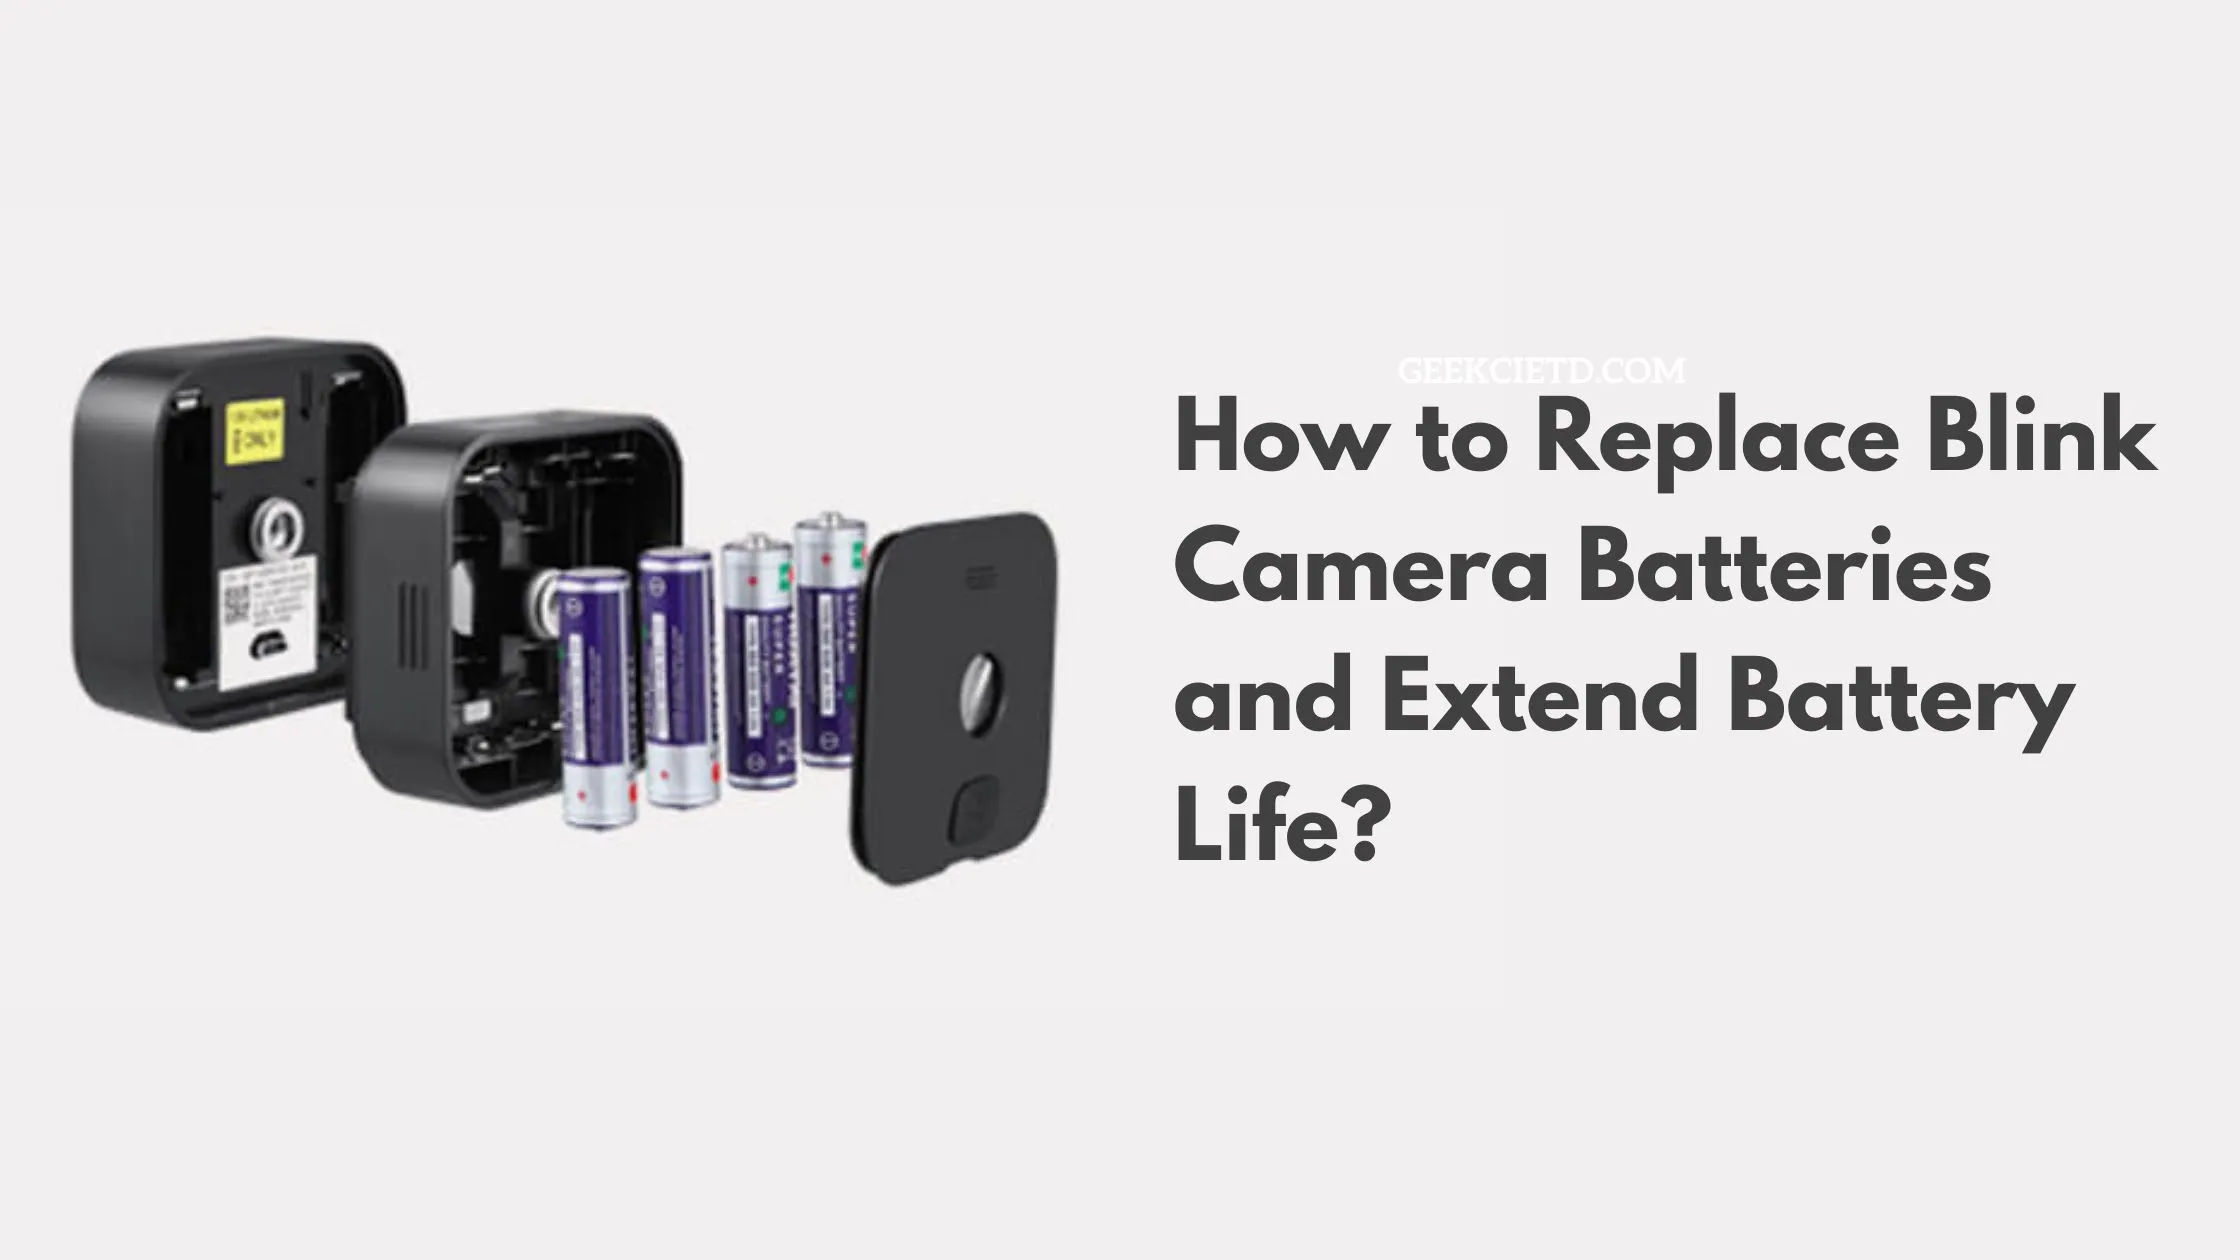 How to Replace Blink Camera Batteries and Extend Battery Life